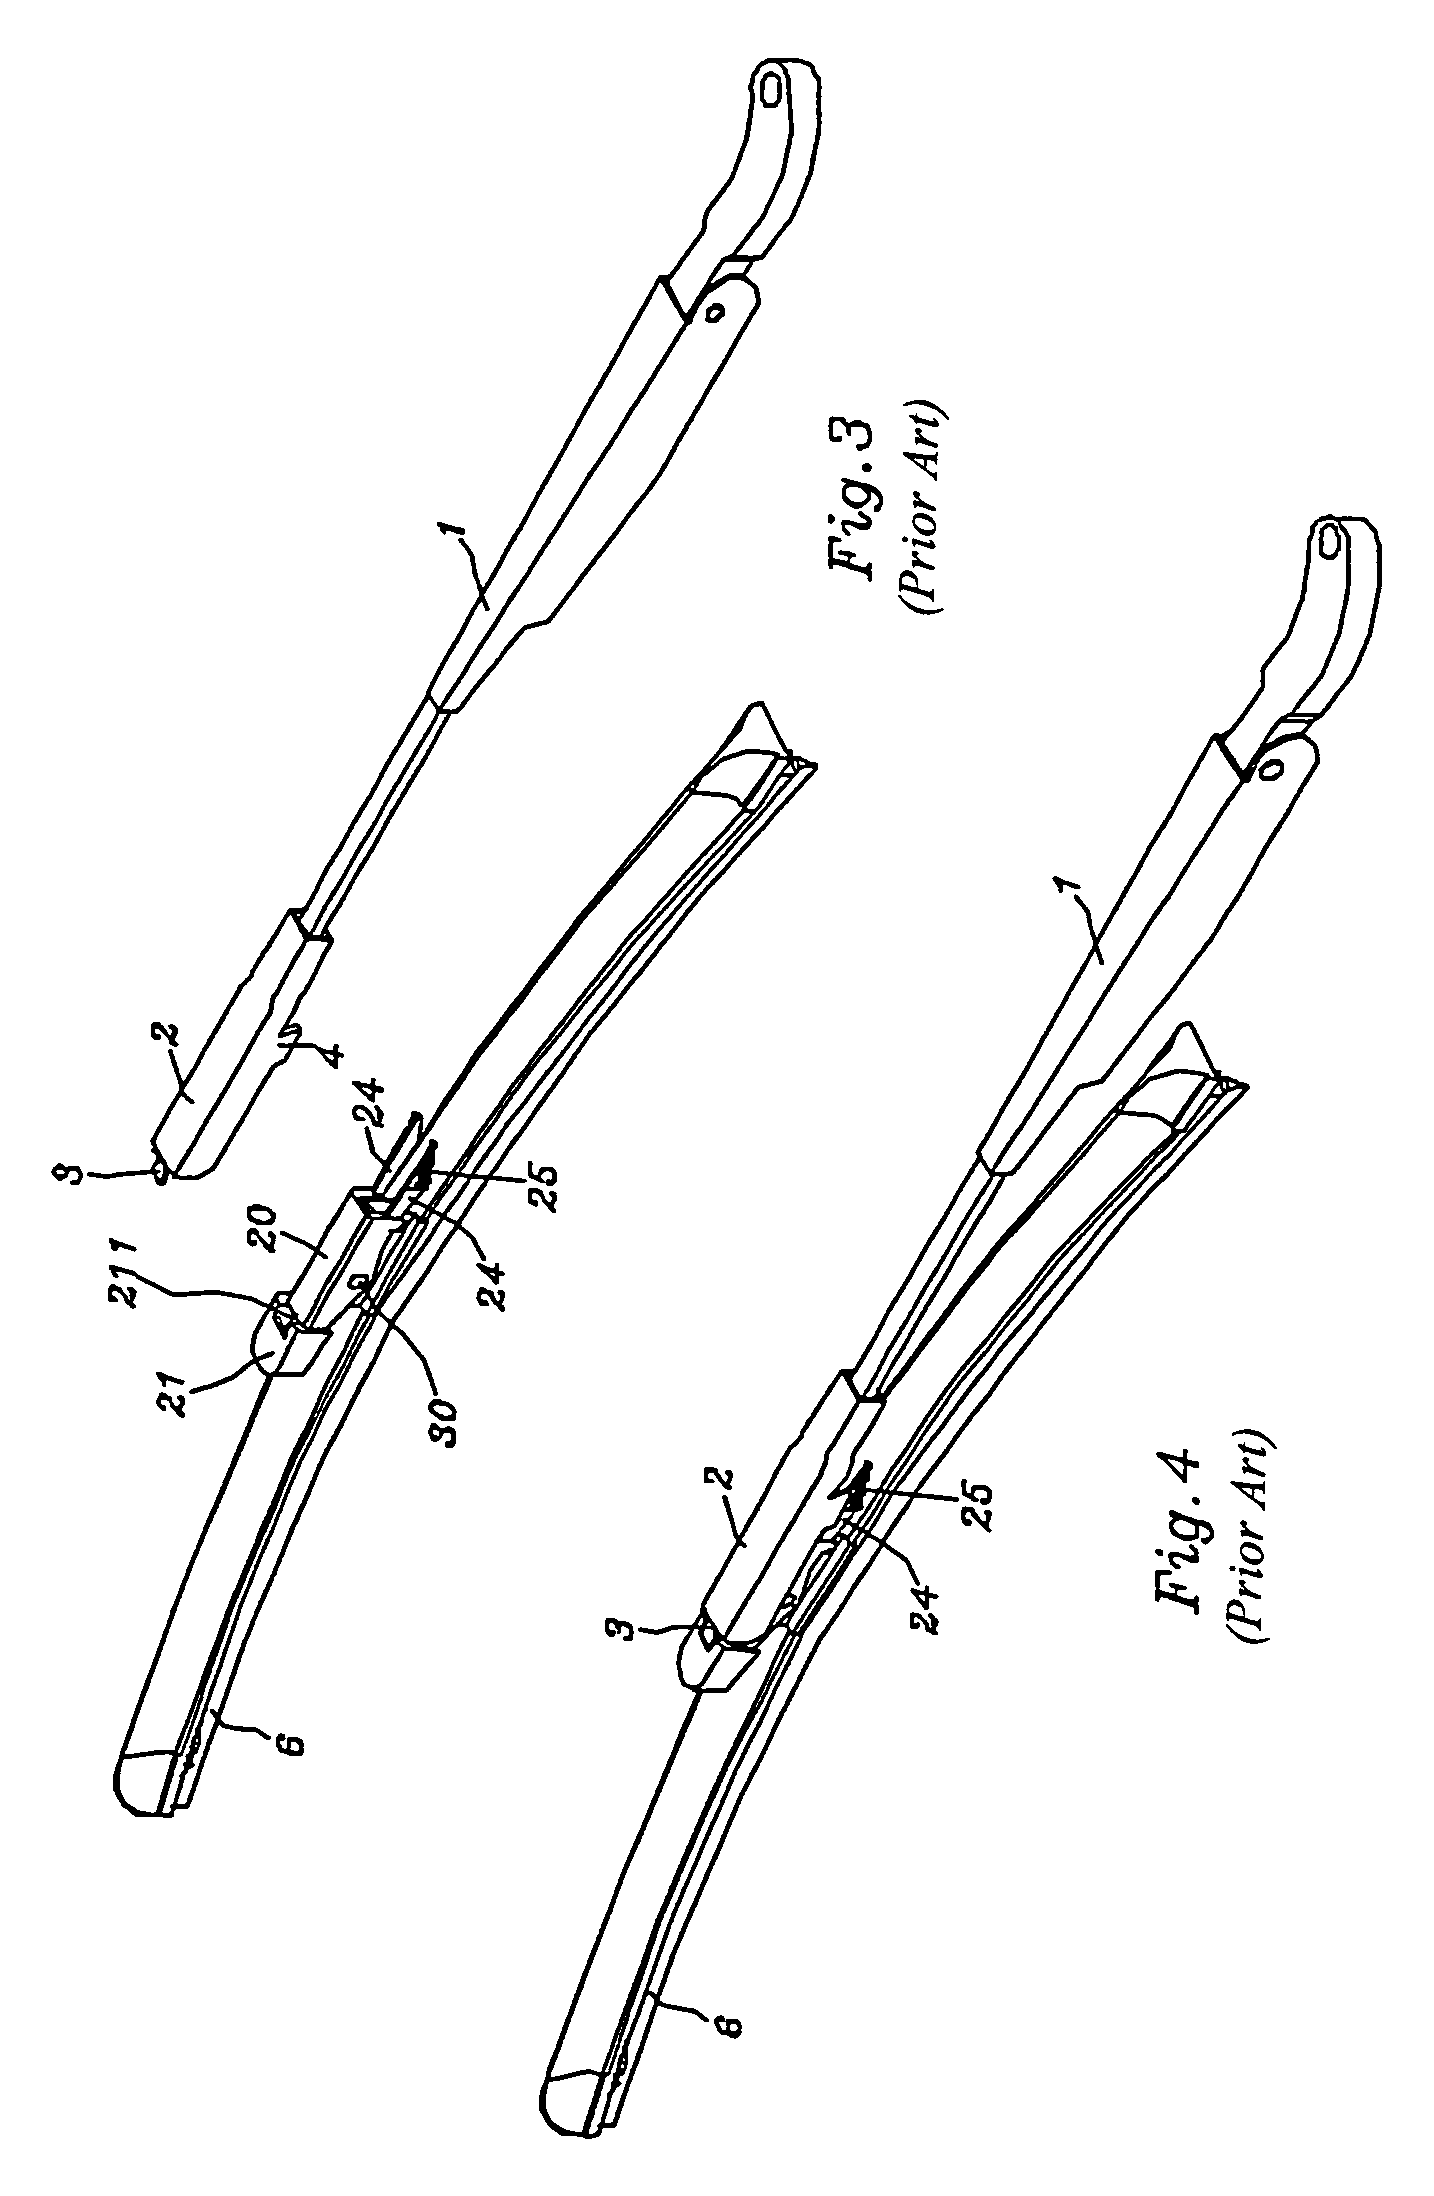 Joint device for wiper arm of car windshield